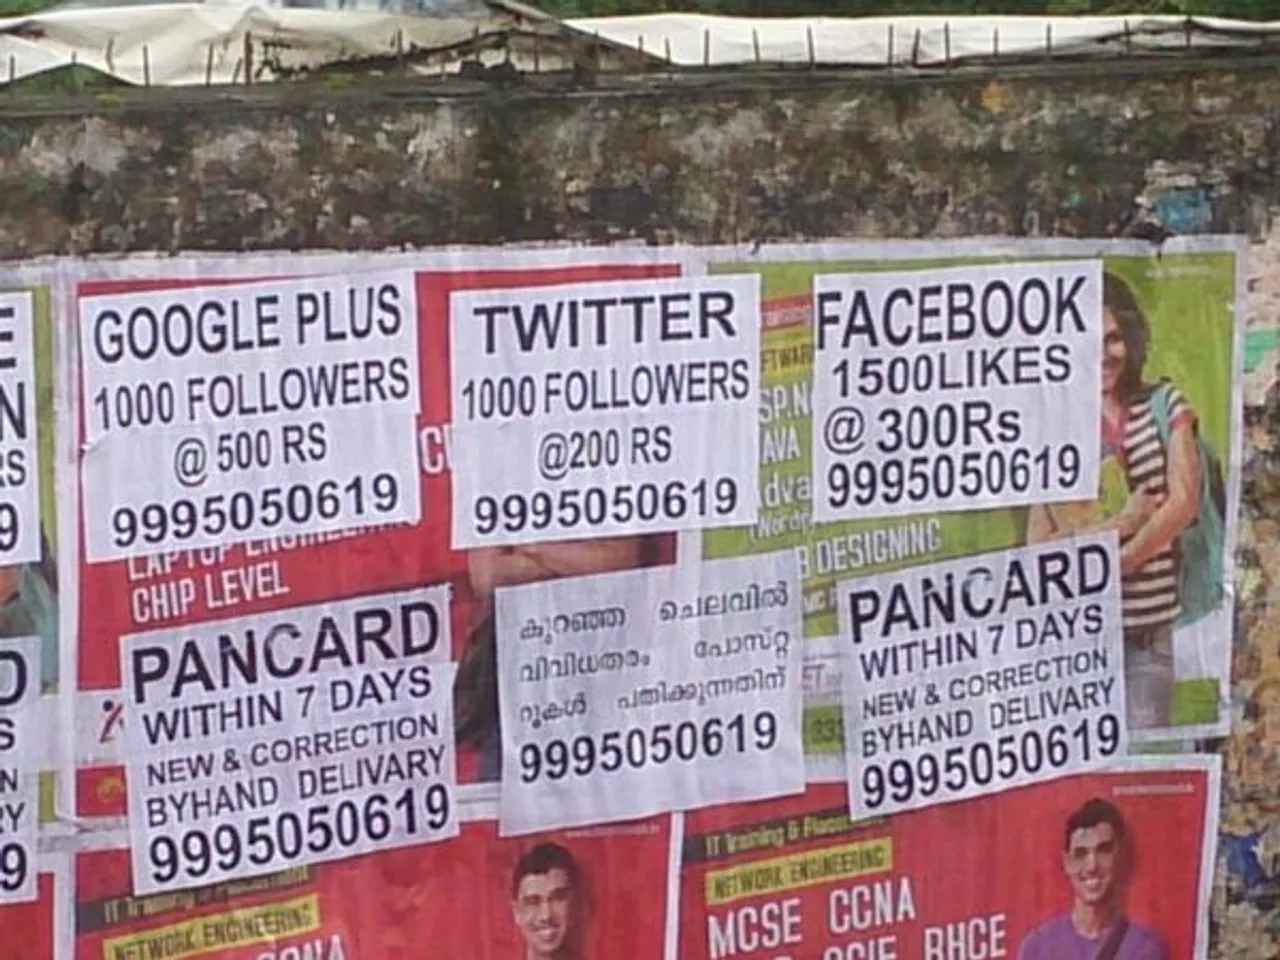 Now Available: Facebook likes for Rs.300 and Twitter Followers for Rs.200 